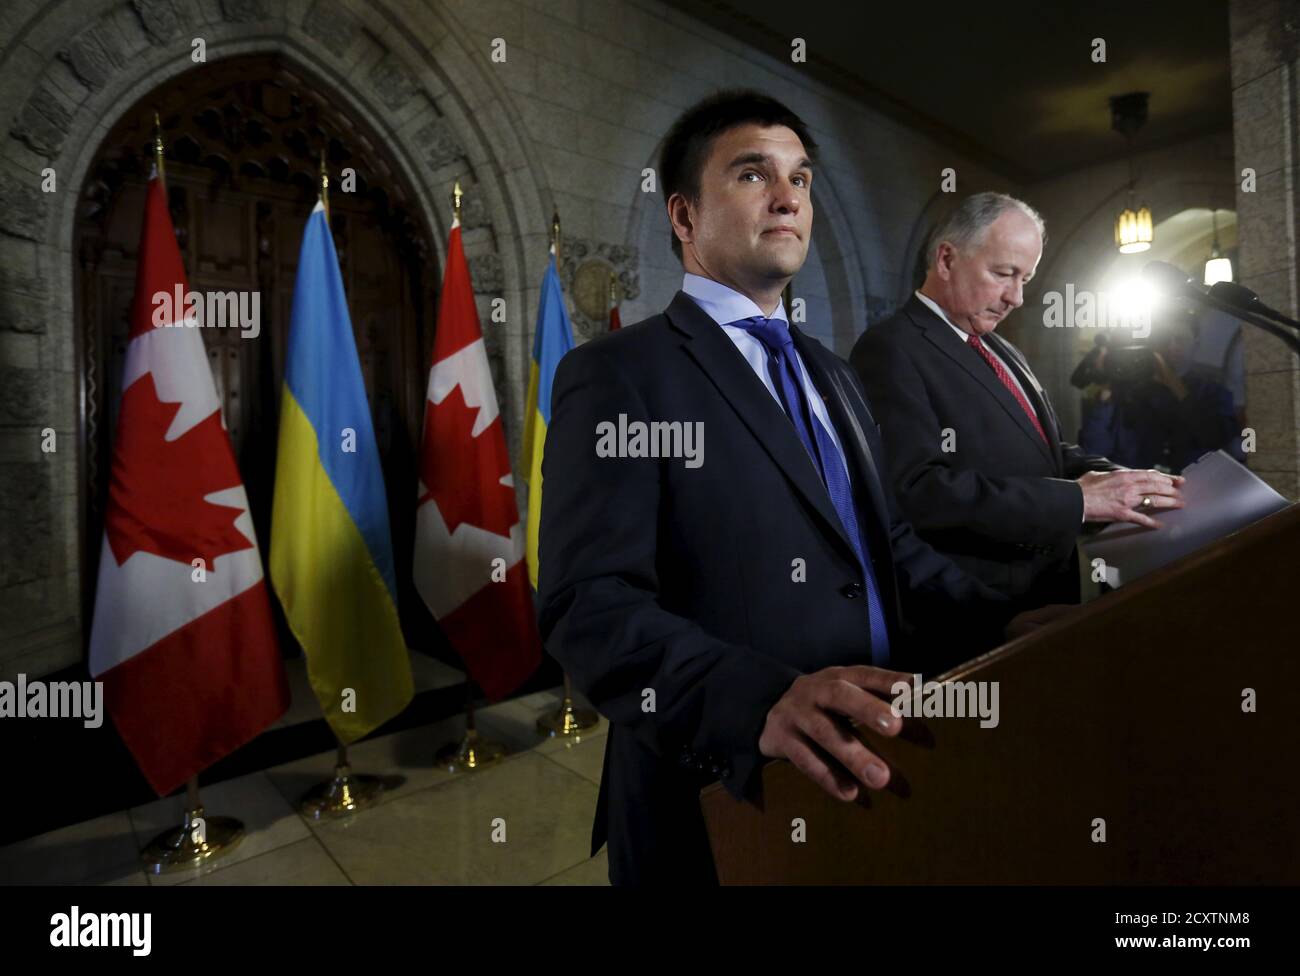 Ukraine's Foreign Minister Pavlo Klimkin (L) takes part in a news conference with his Canadian counterpart Rob Nicholson on Parliament Hill in Ottawa April 30, 2015. REUTERS/Chris Wattie Stock Photo